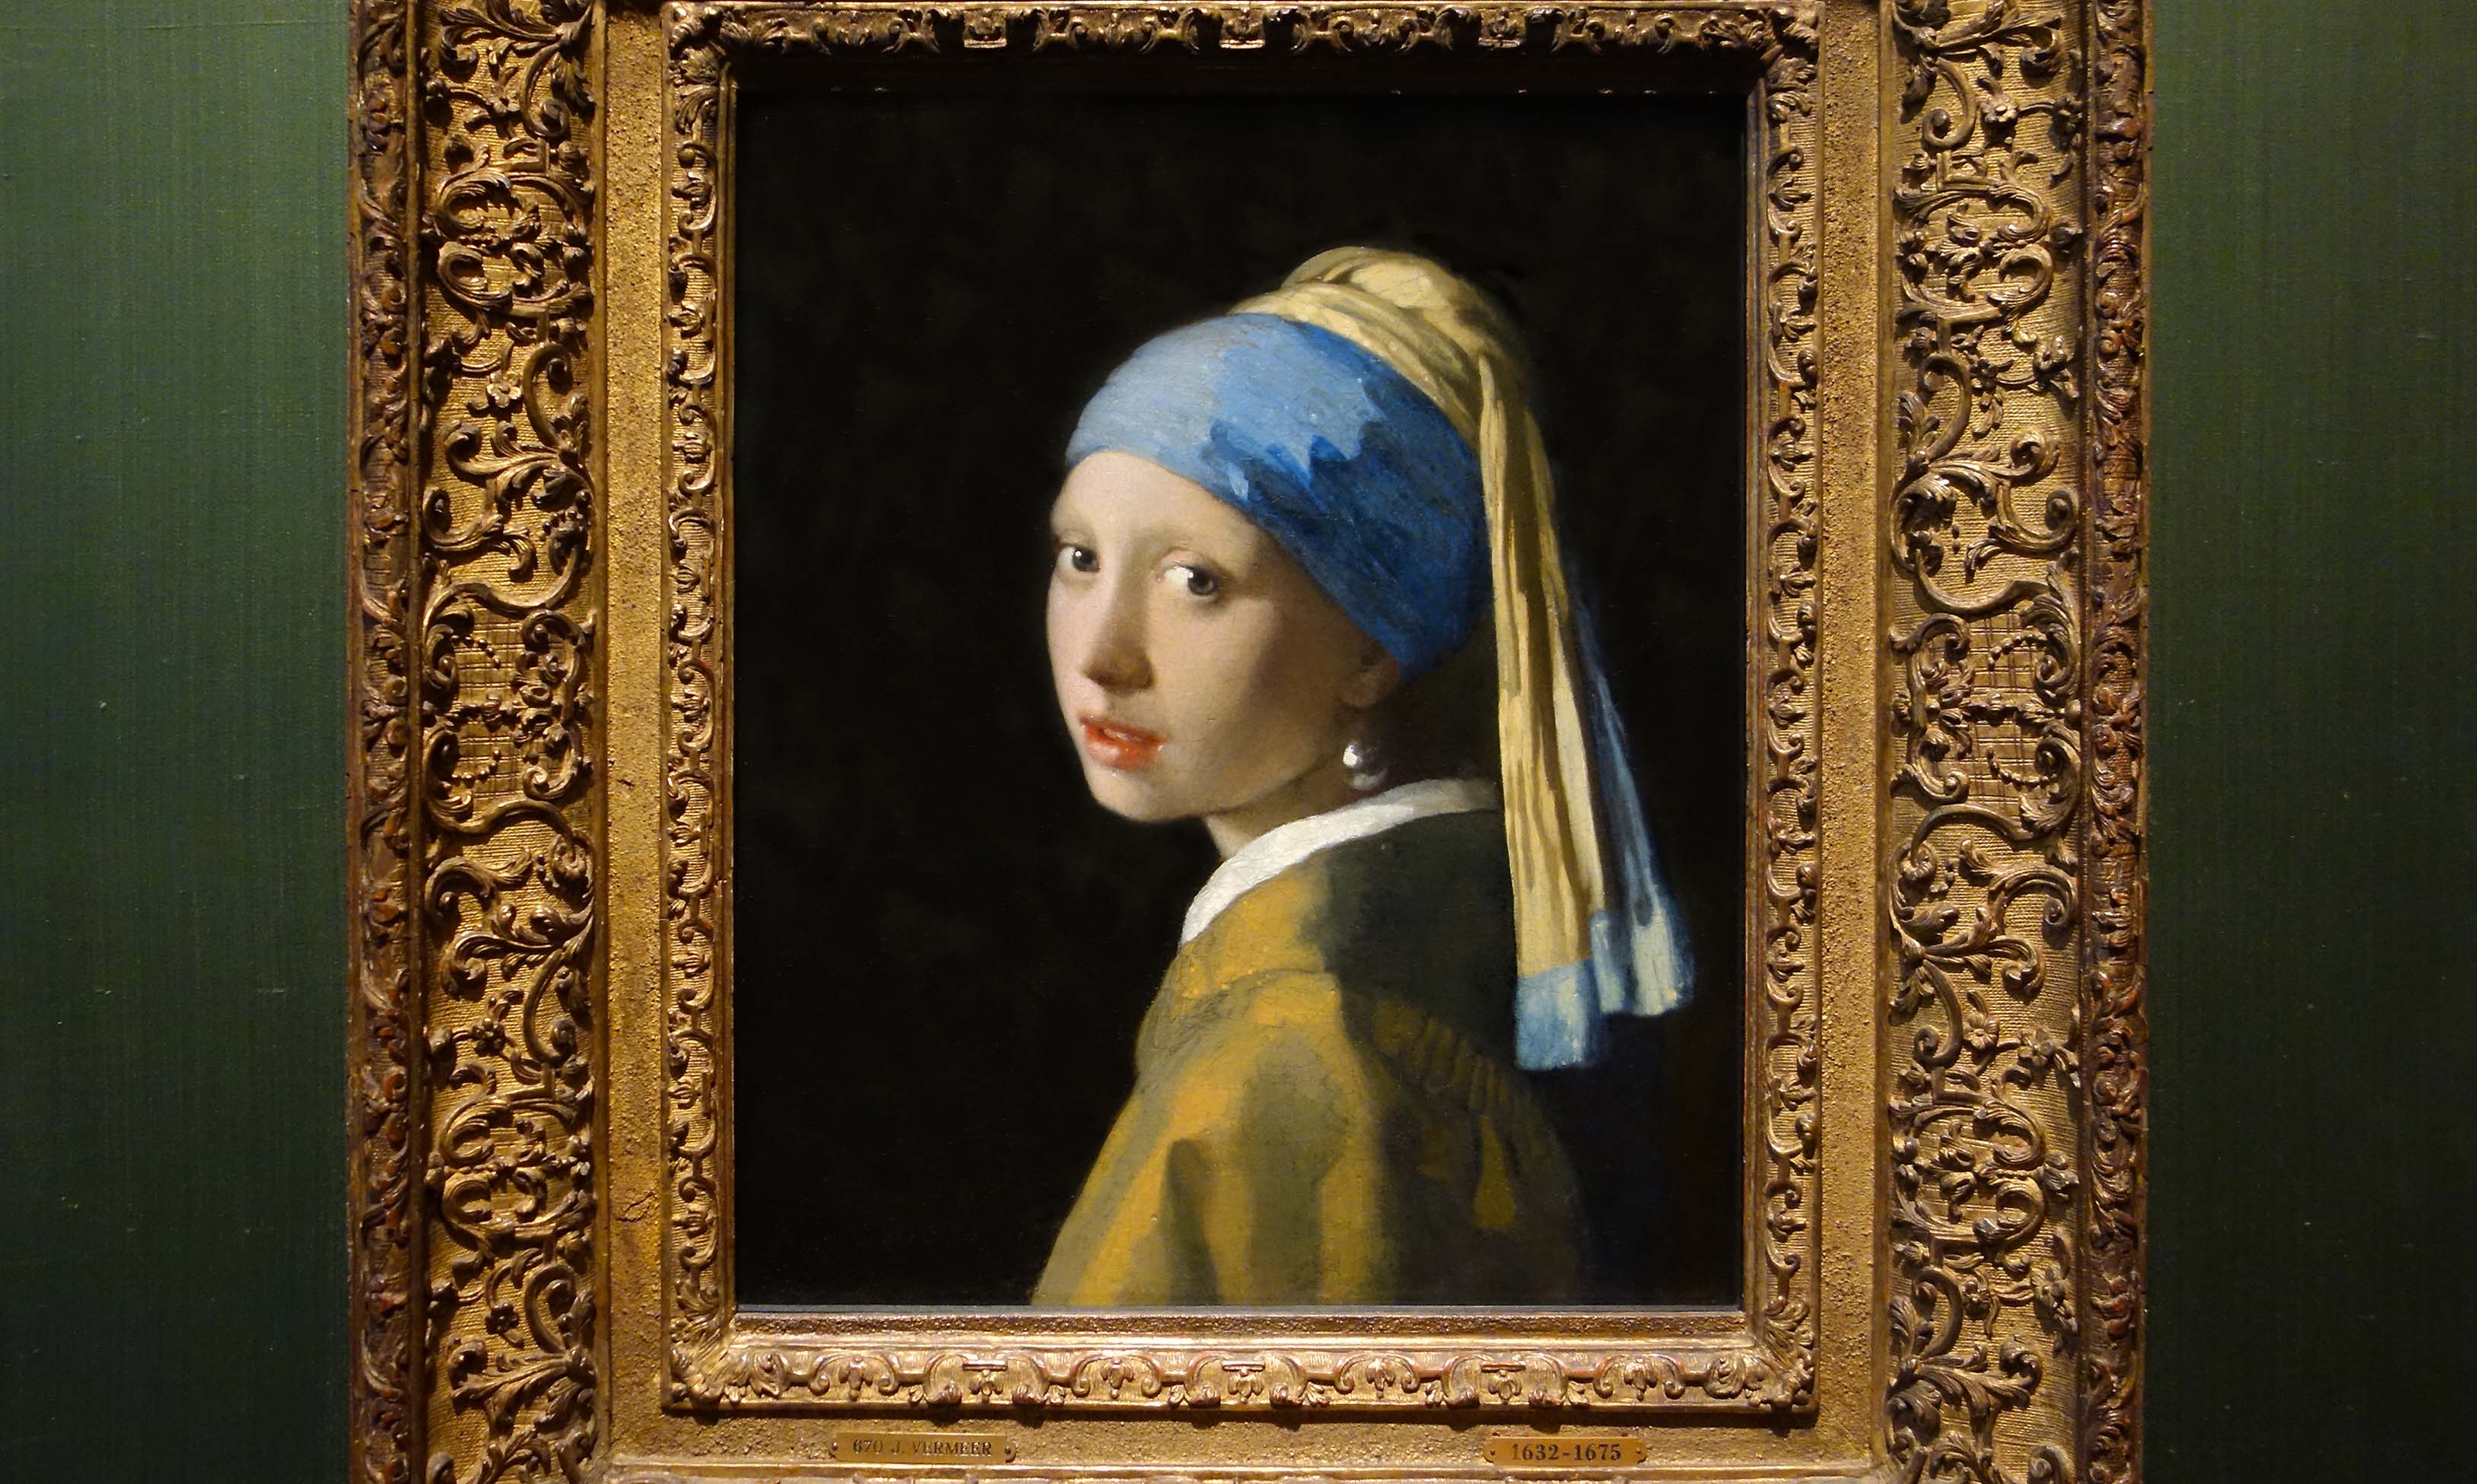 Johannes Vermeer, Girl with a Pearl Earring, c. 1665, oil on canvas, 44.5 x 39 cm (Mauritshuis, The Hague)